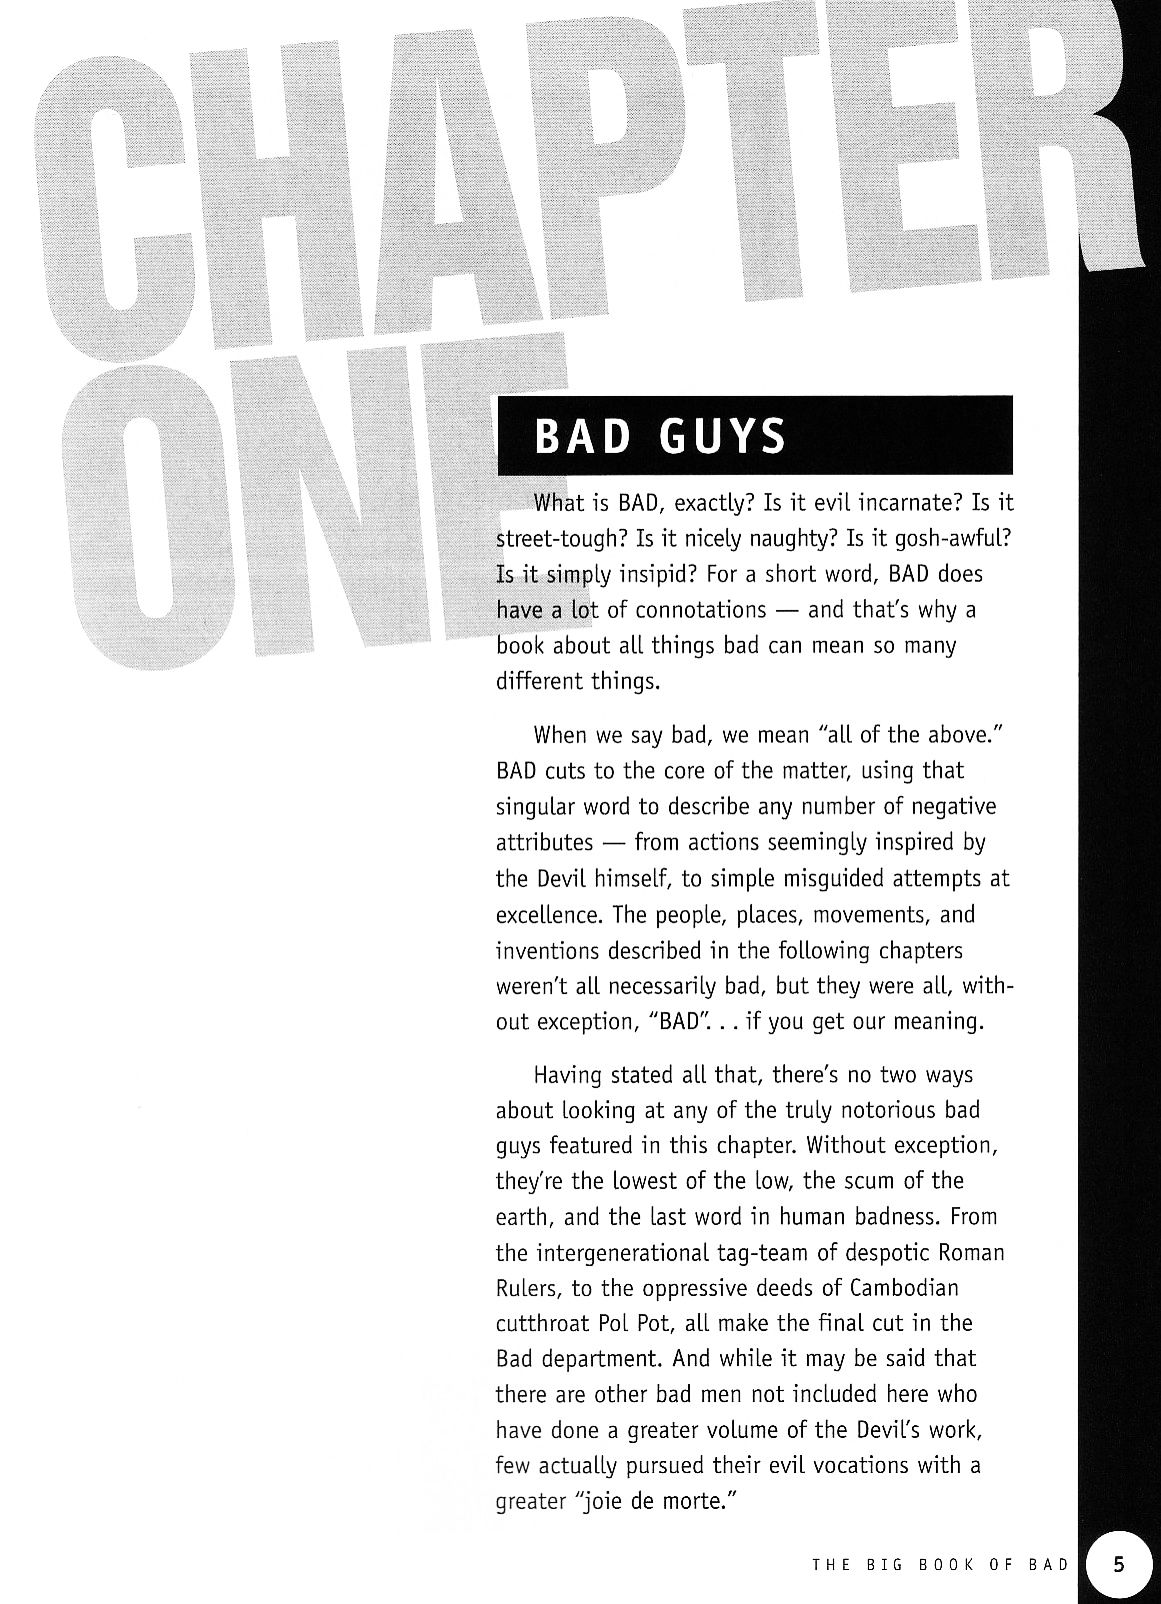 Read online The Big Book of... comic -  Issue # TPB Bad - 5